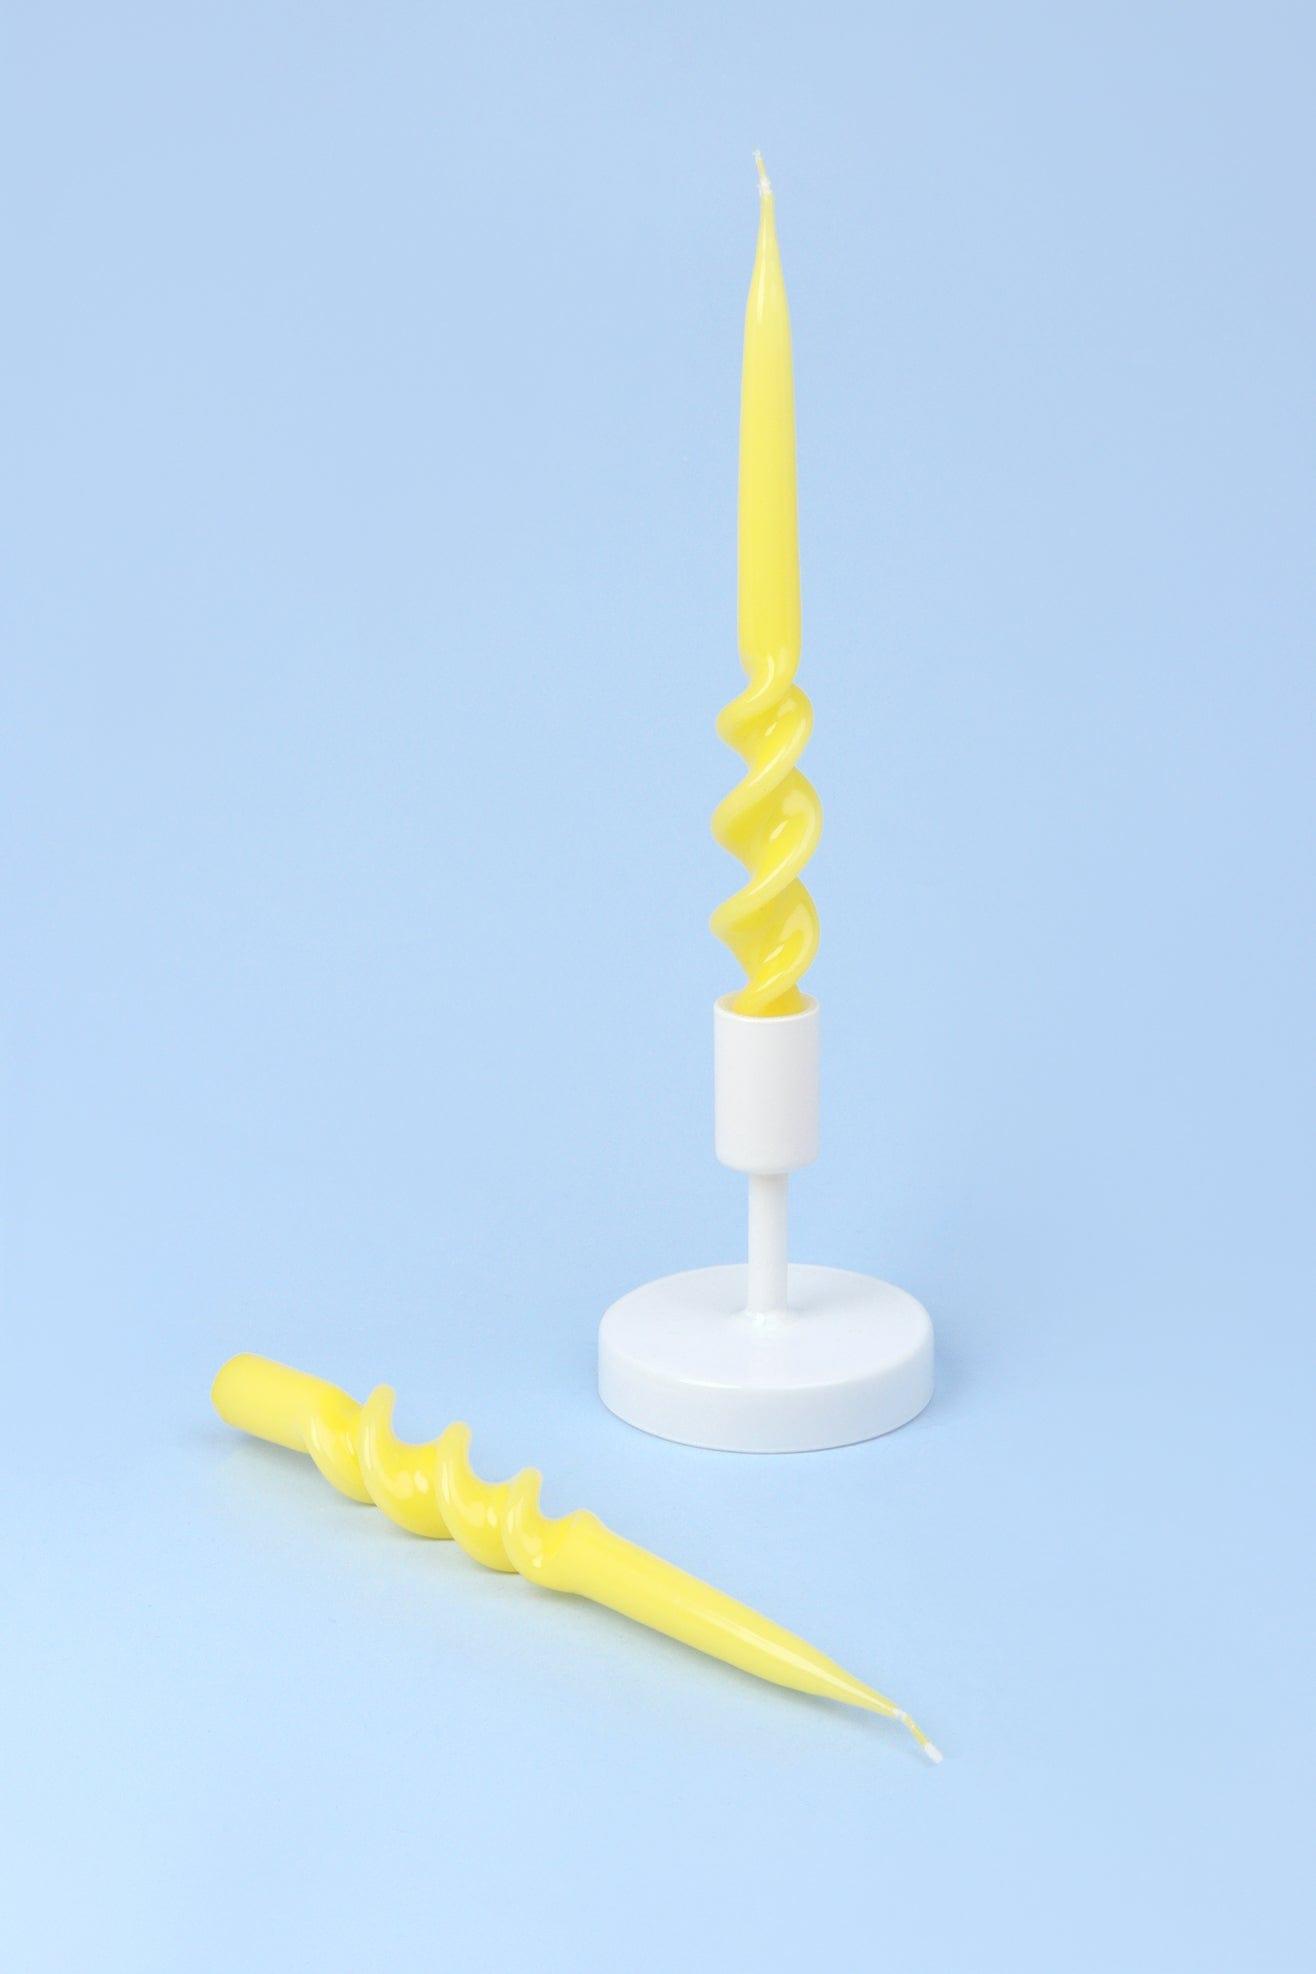 G Decor Candles Yellow Set of 2Yellow 9-inch Spiral Twisted Hand Dipped Candlesticks Taper Church Dinner Candles